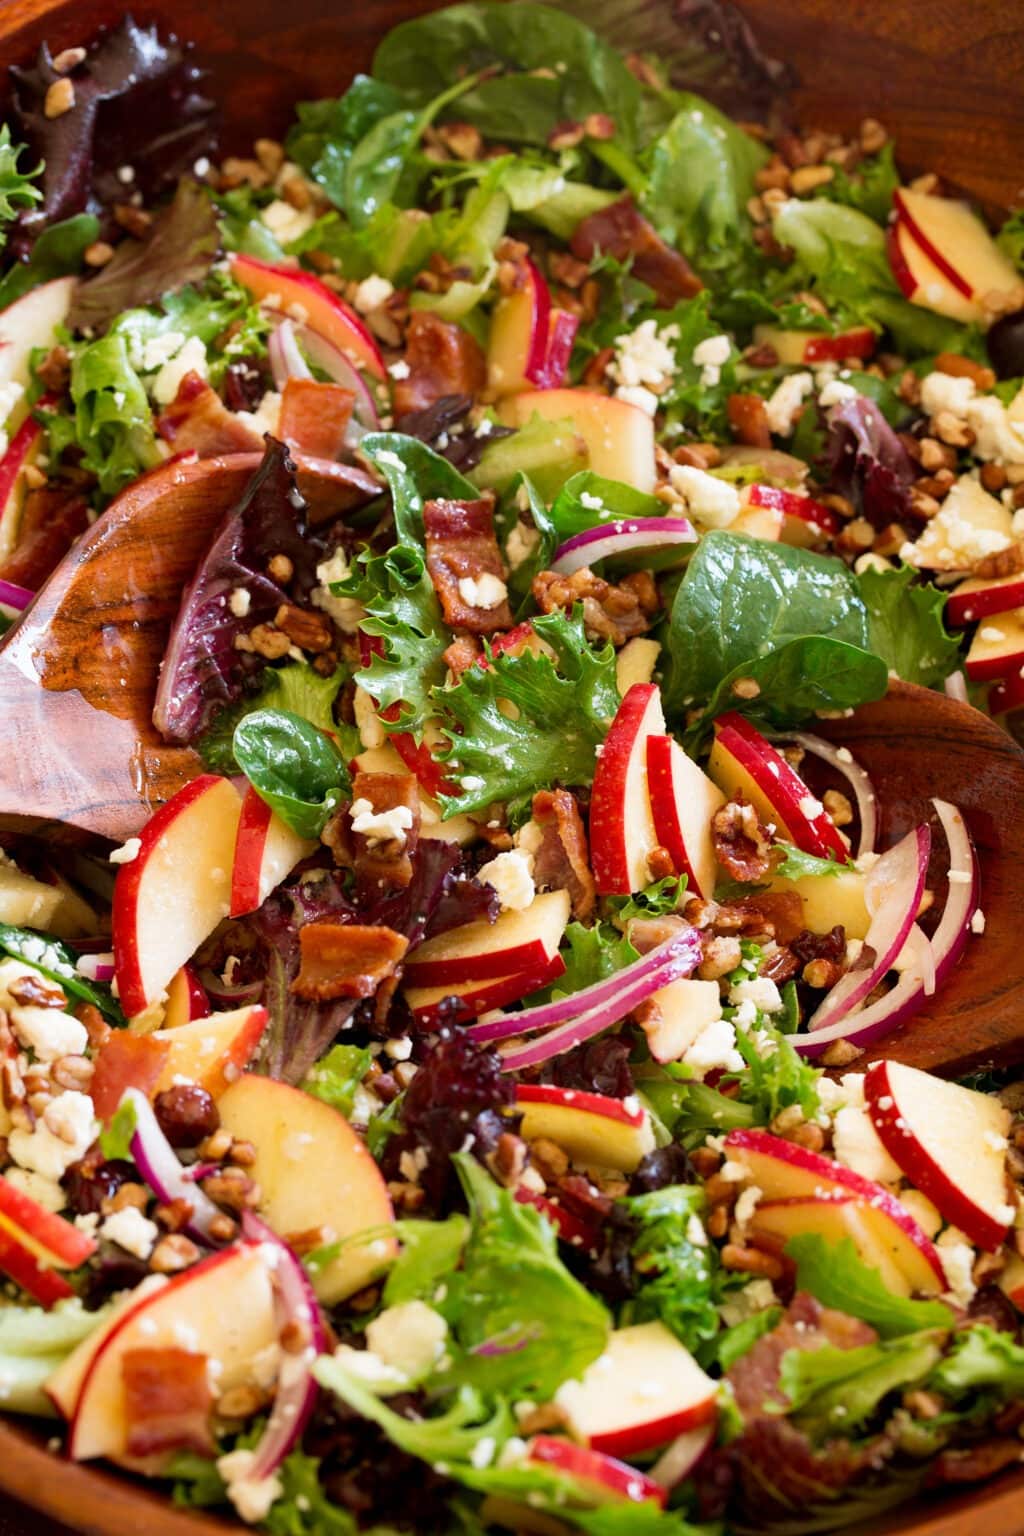 Salad with spring lettuce, thinly slice apples, pecans, feta cheese, dried cranberries, bacon, red onion and drizzled with maple cider vinaigrette  served in a wooden bowl with wooden spoon 